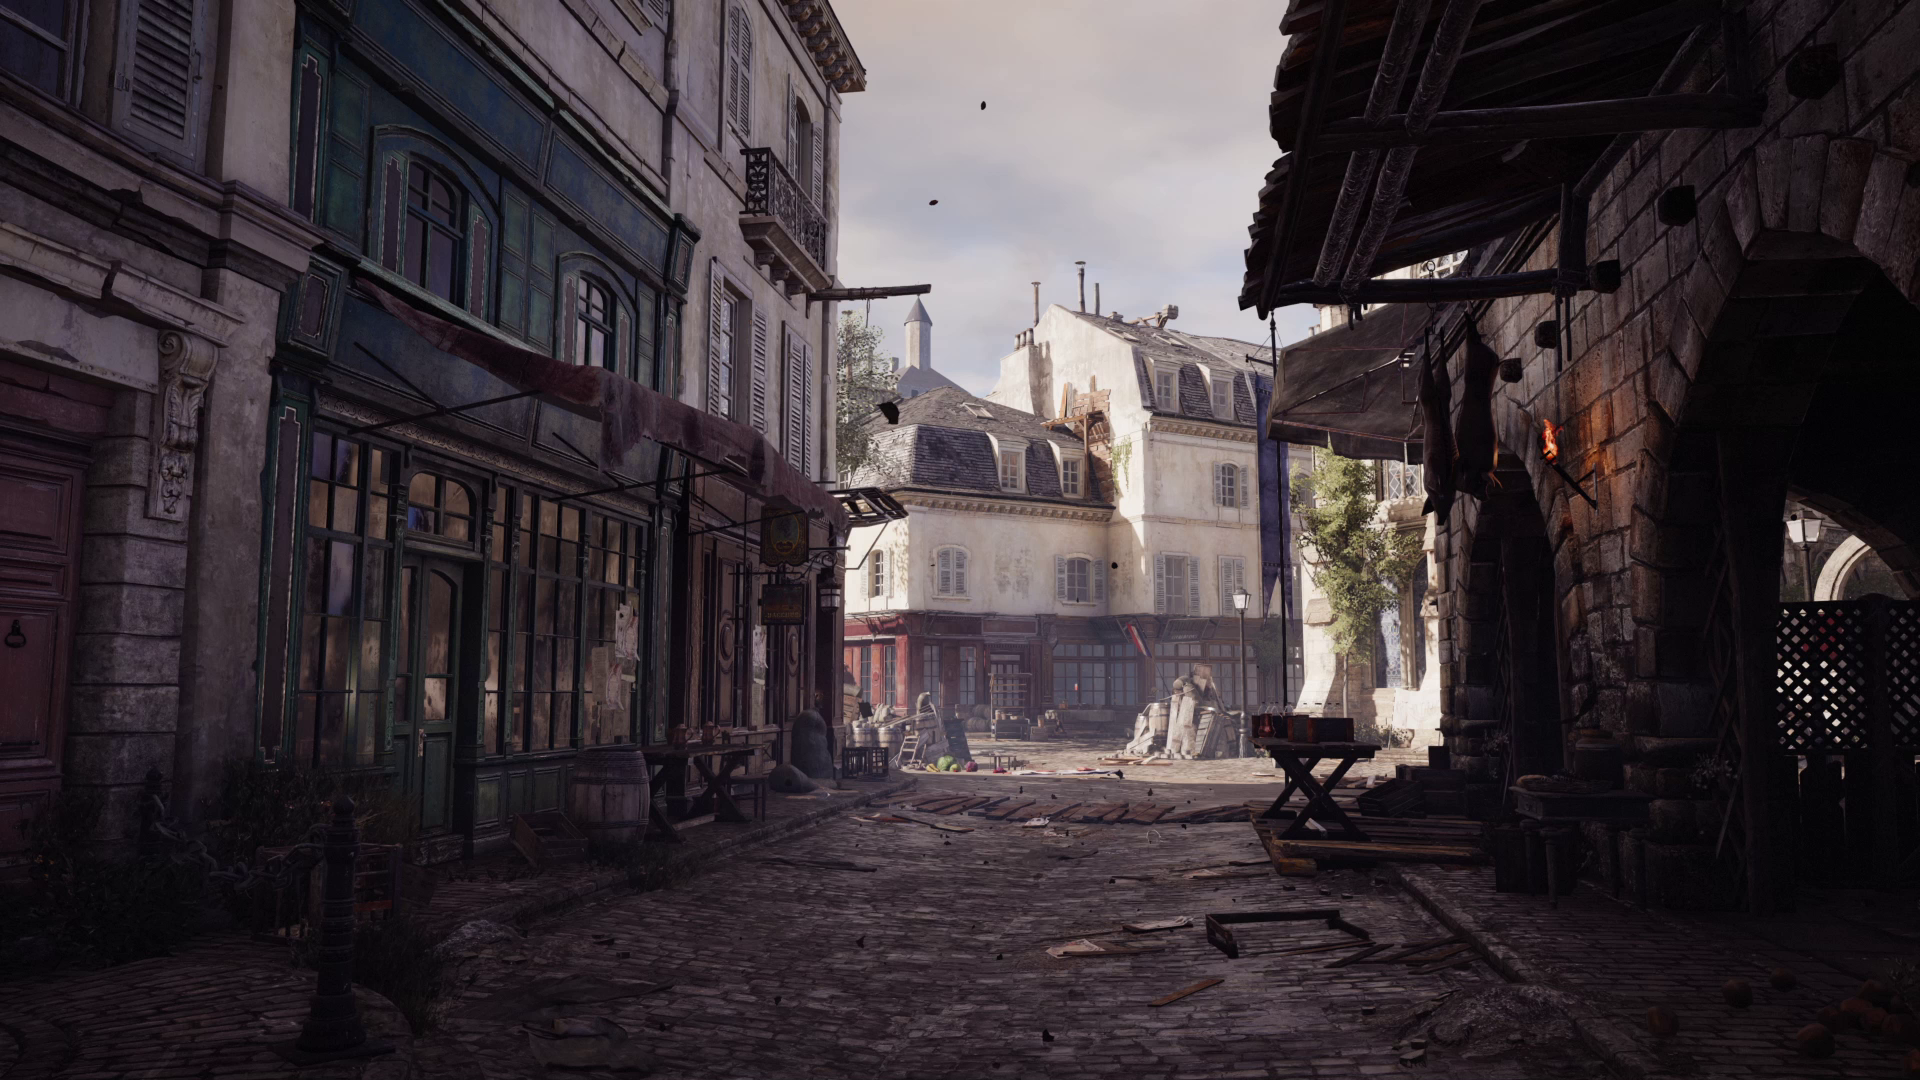 Video Game Assassin's Creed: Unity HD Wallpaper | Background Image